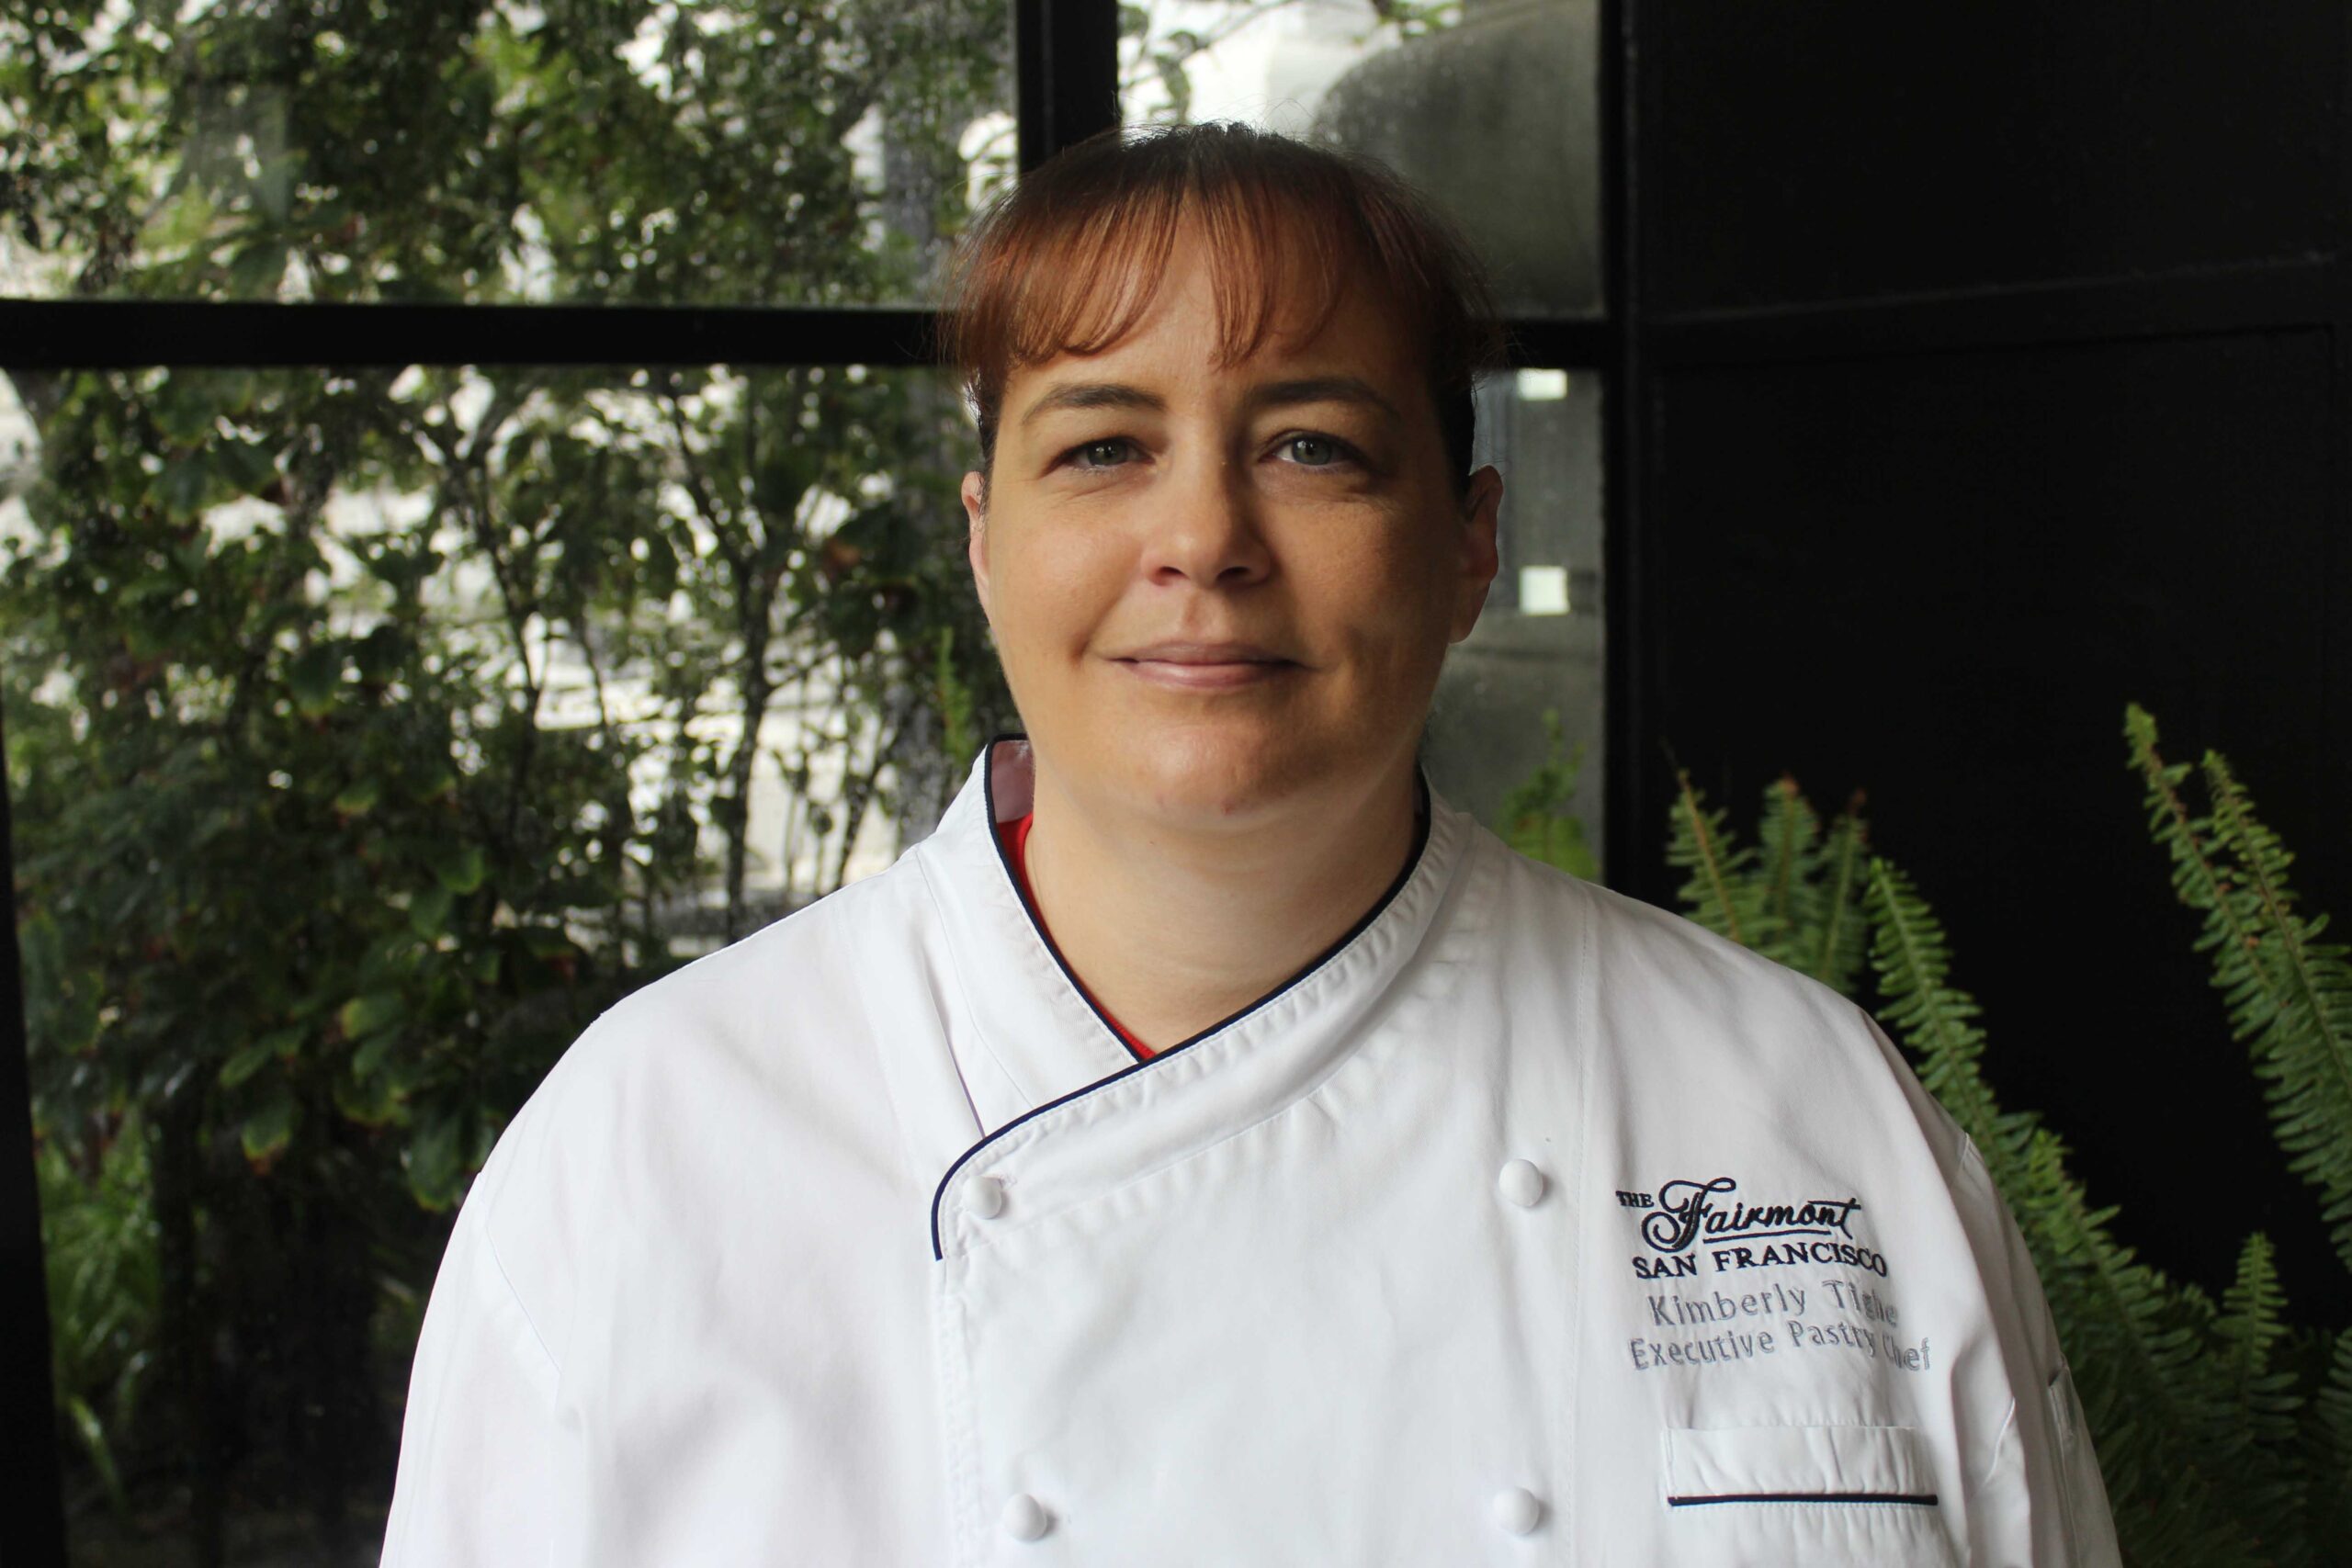 Fairmont San Francisco Executive Pastry Chef Kimberly Tighe at the grand unveiling of the Giant Gingerbread House in 2014. (Photo: Courtesy of the Fairmont San Francisco)